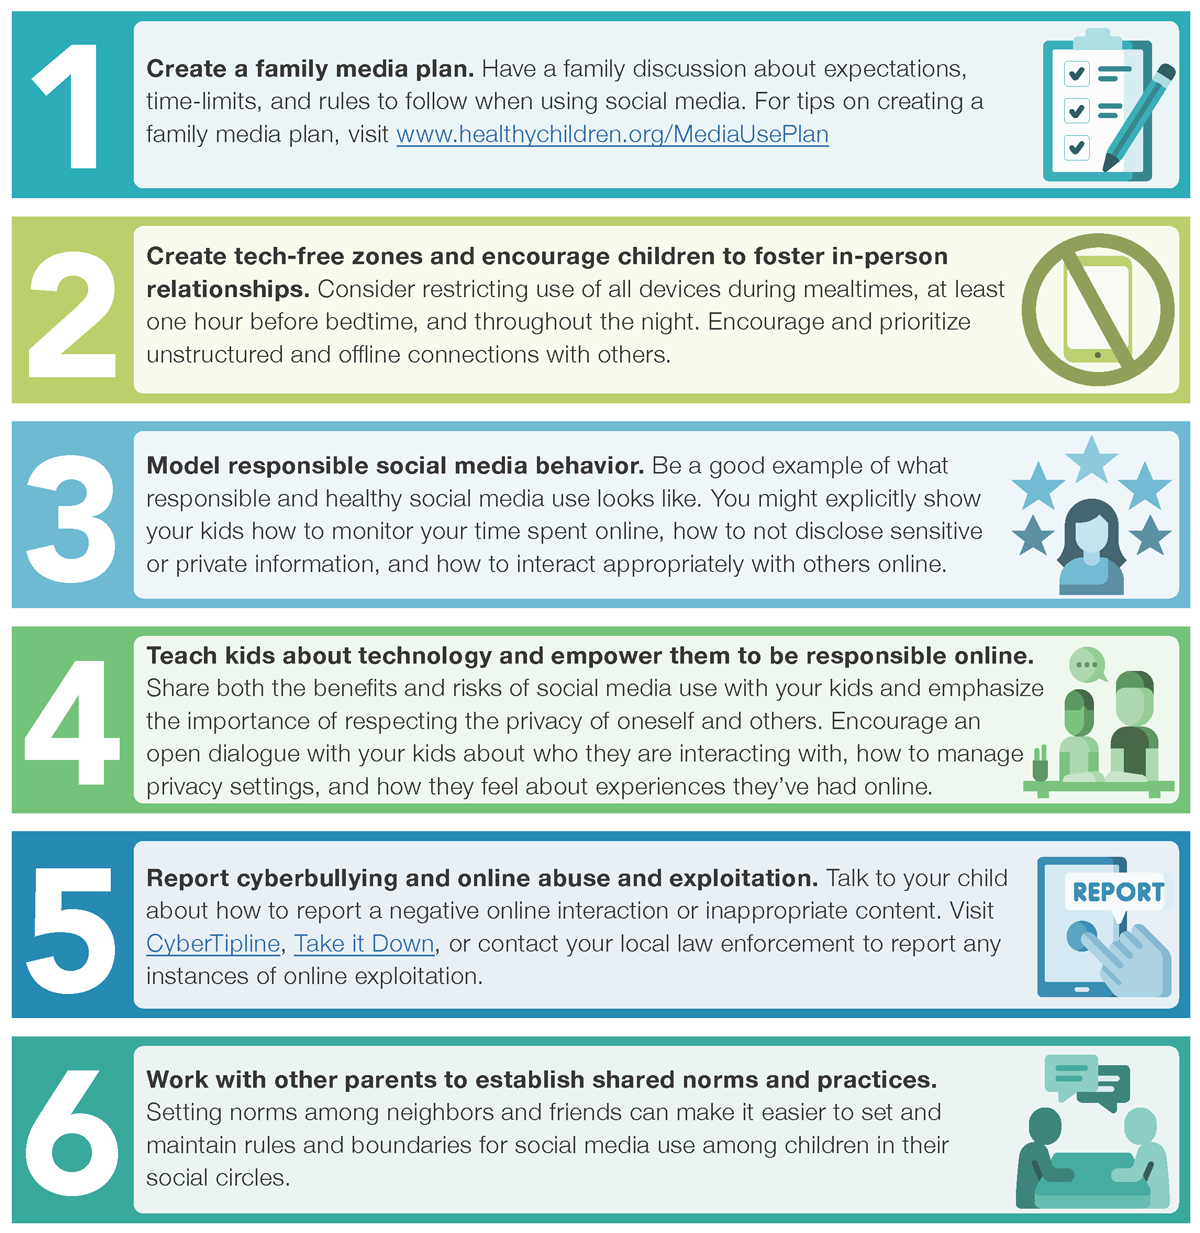 Infographic for Parents and caregivers can support the appropriate and healthy use of social media. 1.Create a family media plan. Have a family discussion about expectations, time-limits, and rules to follow when using social media. For tips on creating a family media plan, visit www.healthychildren.org/MediaUsePlan  2.Create tech-free zones and encourage children to foster in-person relationships. Consider restricting use of all devices during mealtimes, at least one hour before bedtime, and throughout the night. Encourage and prioritize unstructured and offline connections with others.  3.Model responsible social media behavior. Be a good example of what responsible and healthy social media use looks like. You might explicitly show your kids how to monitor your time spent online, how to not disclose sensitive or private information, and how to interact appropriately with others online.  4.Teach kids about technology and empower them to be responsible online. Share both the benefits and risks of social media use with your kids and emphasize the importance of respecting the privacy of oneself and others. Encourage an open dialogue with your kids about who they are interacting with, how to manage privacy settings, and how they feel about experiences they’ve had online.  5.Report cyberbullying and online abuse and exploitation. Talk to your child about how to report a negative online interaction or inappropriate content. Visit CyberTipline, Take it Down, or contact your local law enforcement to report any instances of online exploitation.  6.Work with other parents to establish shared norms and practices. Setting norms among neighbors and friends can make it easier to set and maintain rules and boundaries for social media use among children in their social circles.